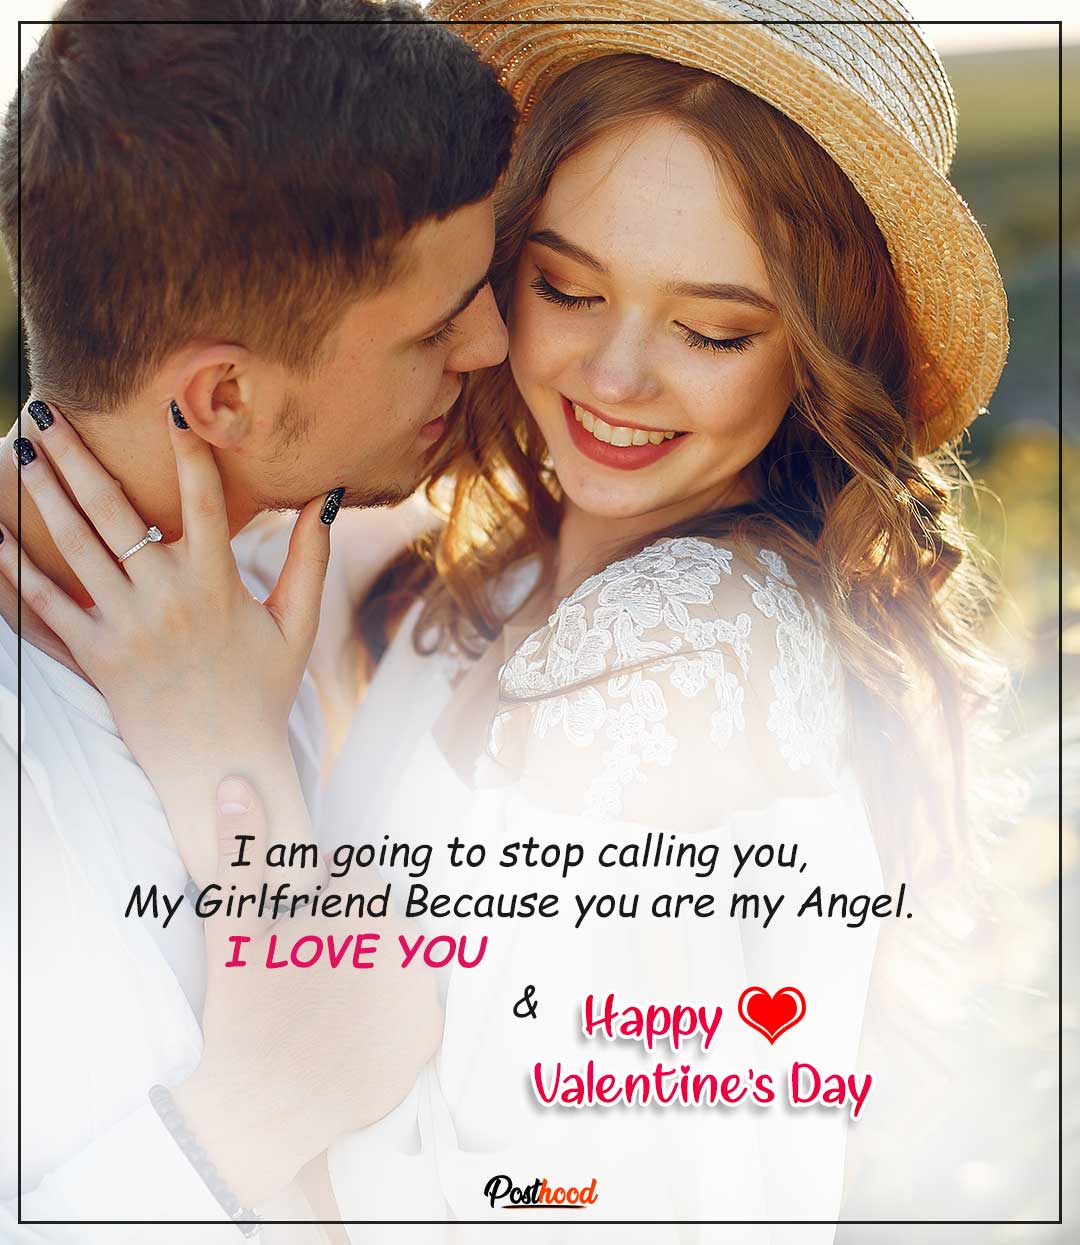 Send your girlfriend these sweet and romantic love messages on Valentine's day to express your love. 